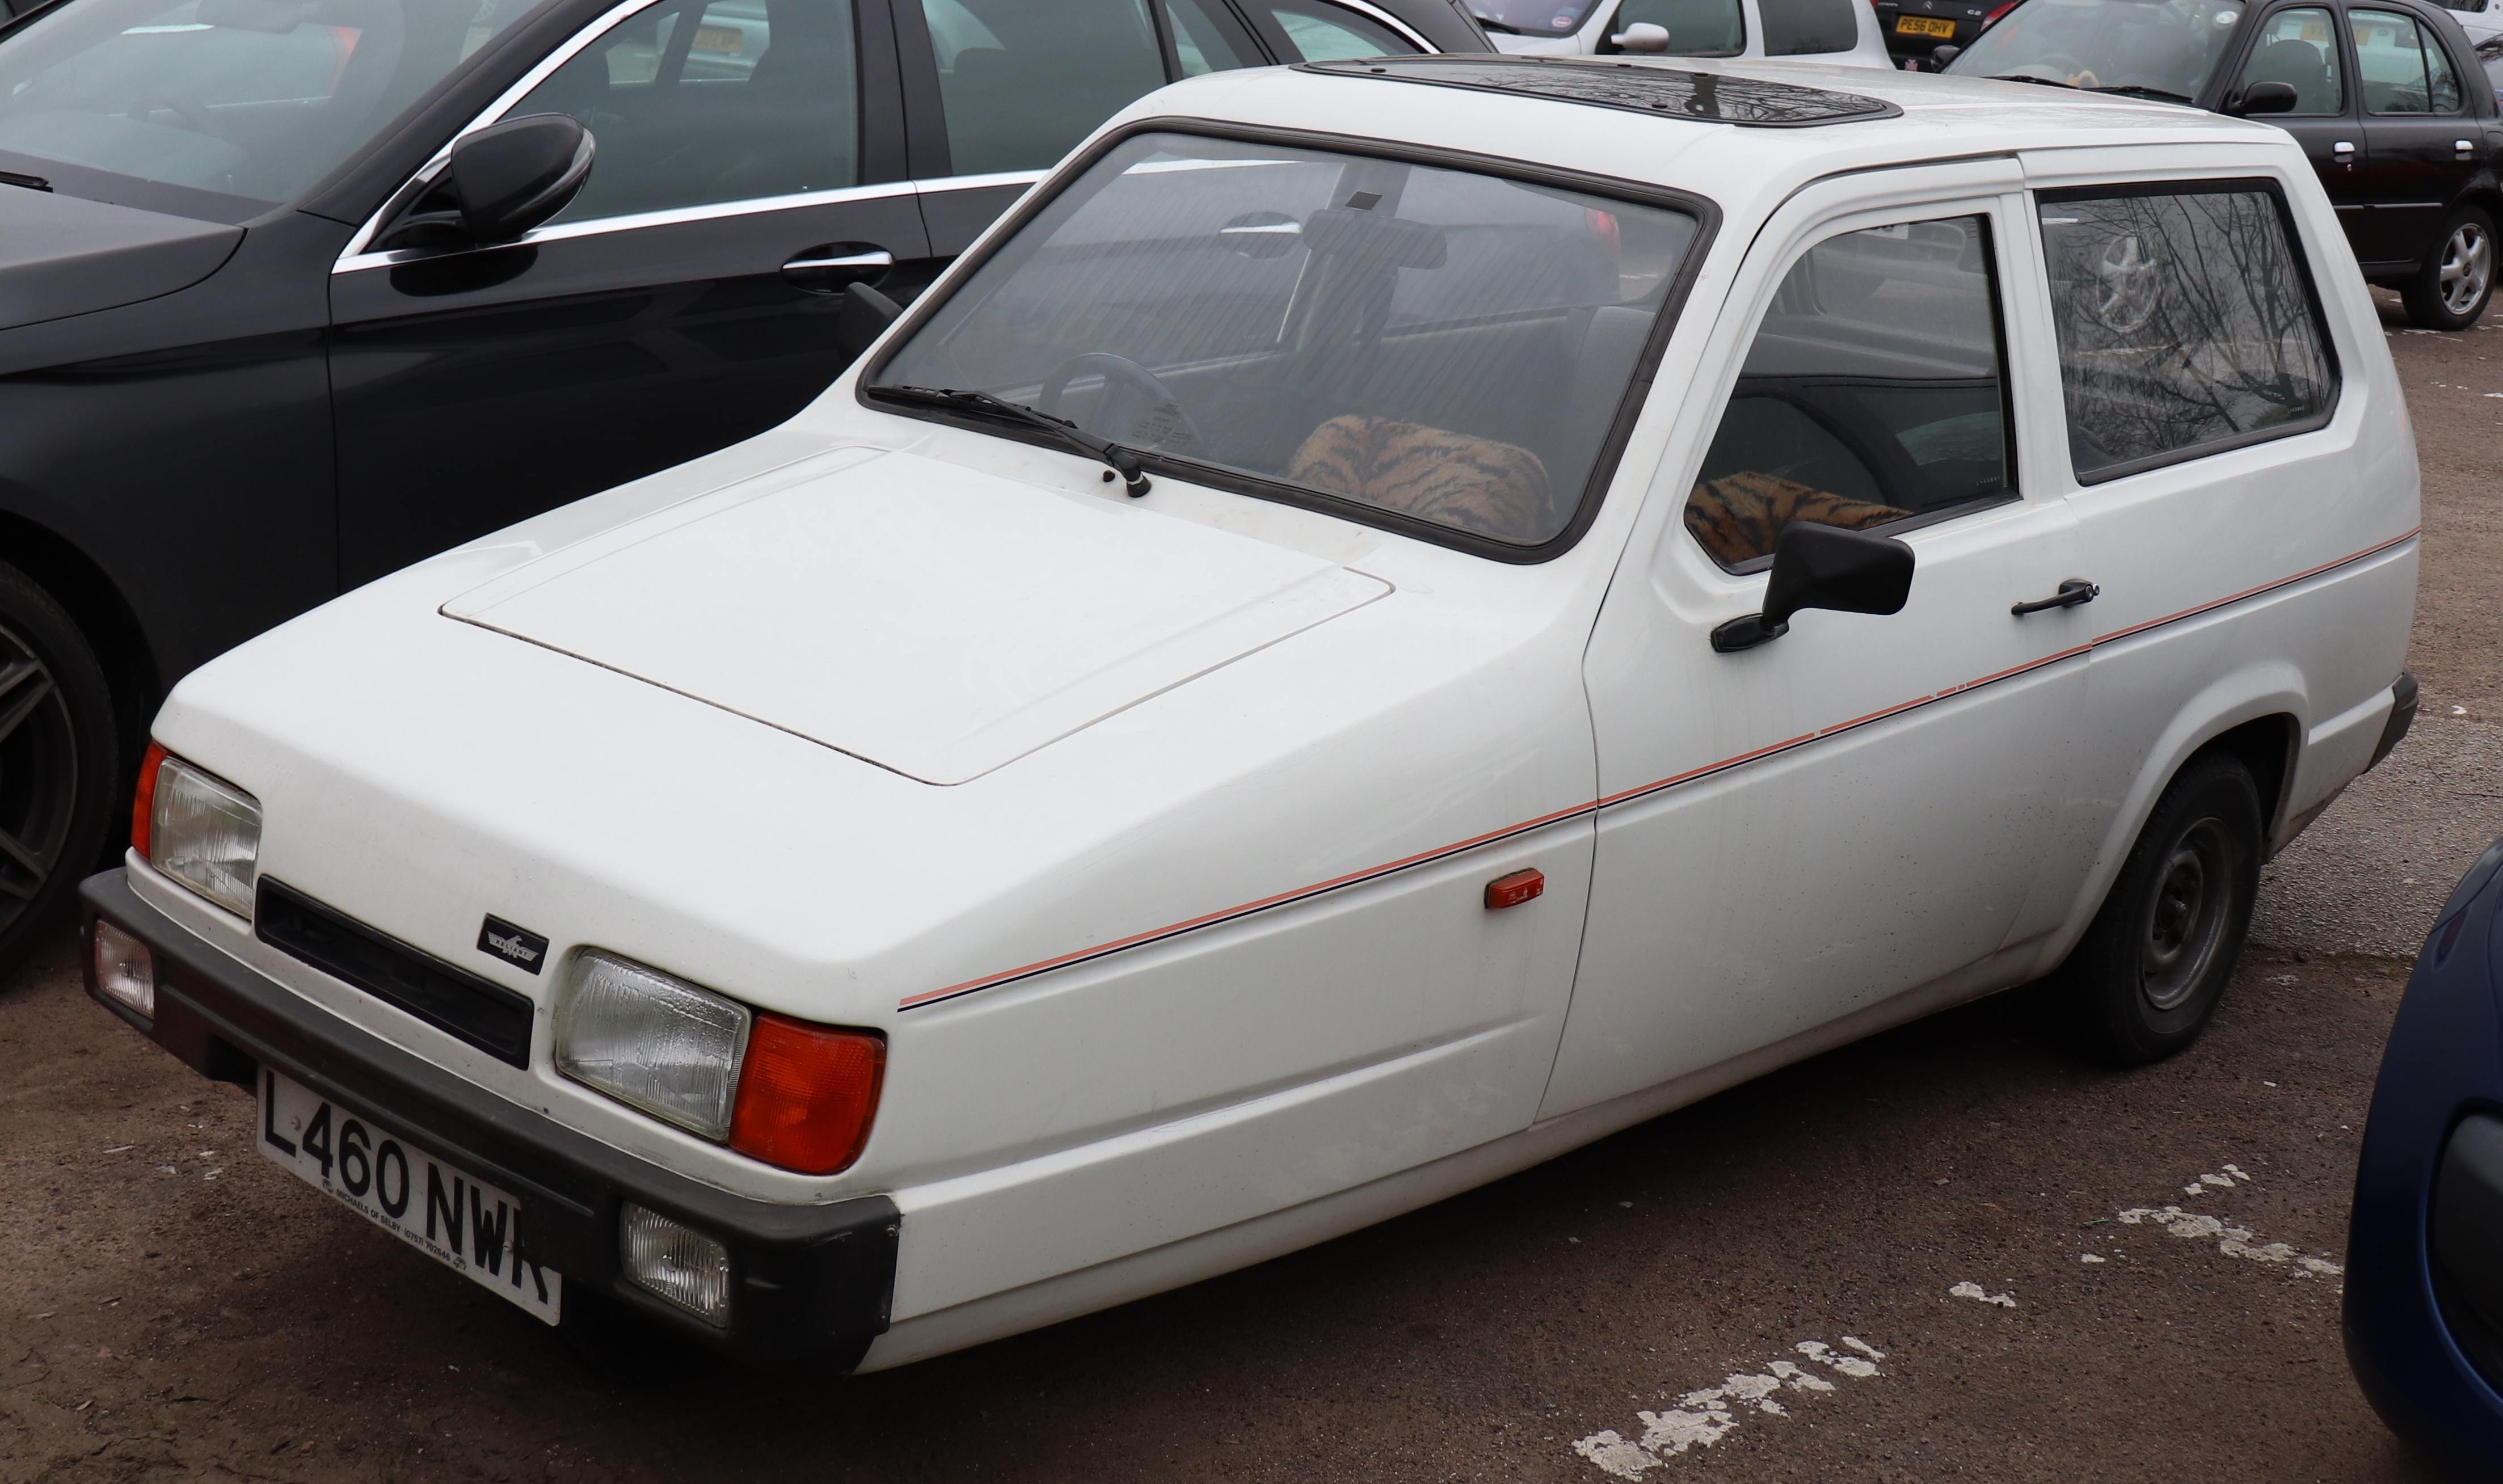 File:1993 Reliant Robin LX 850cc Front.jpg - Wikimedia Commons